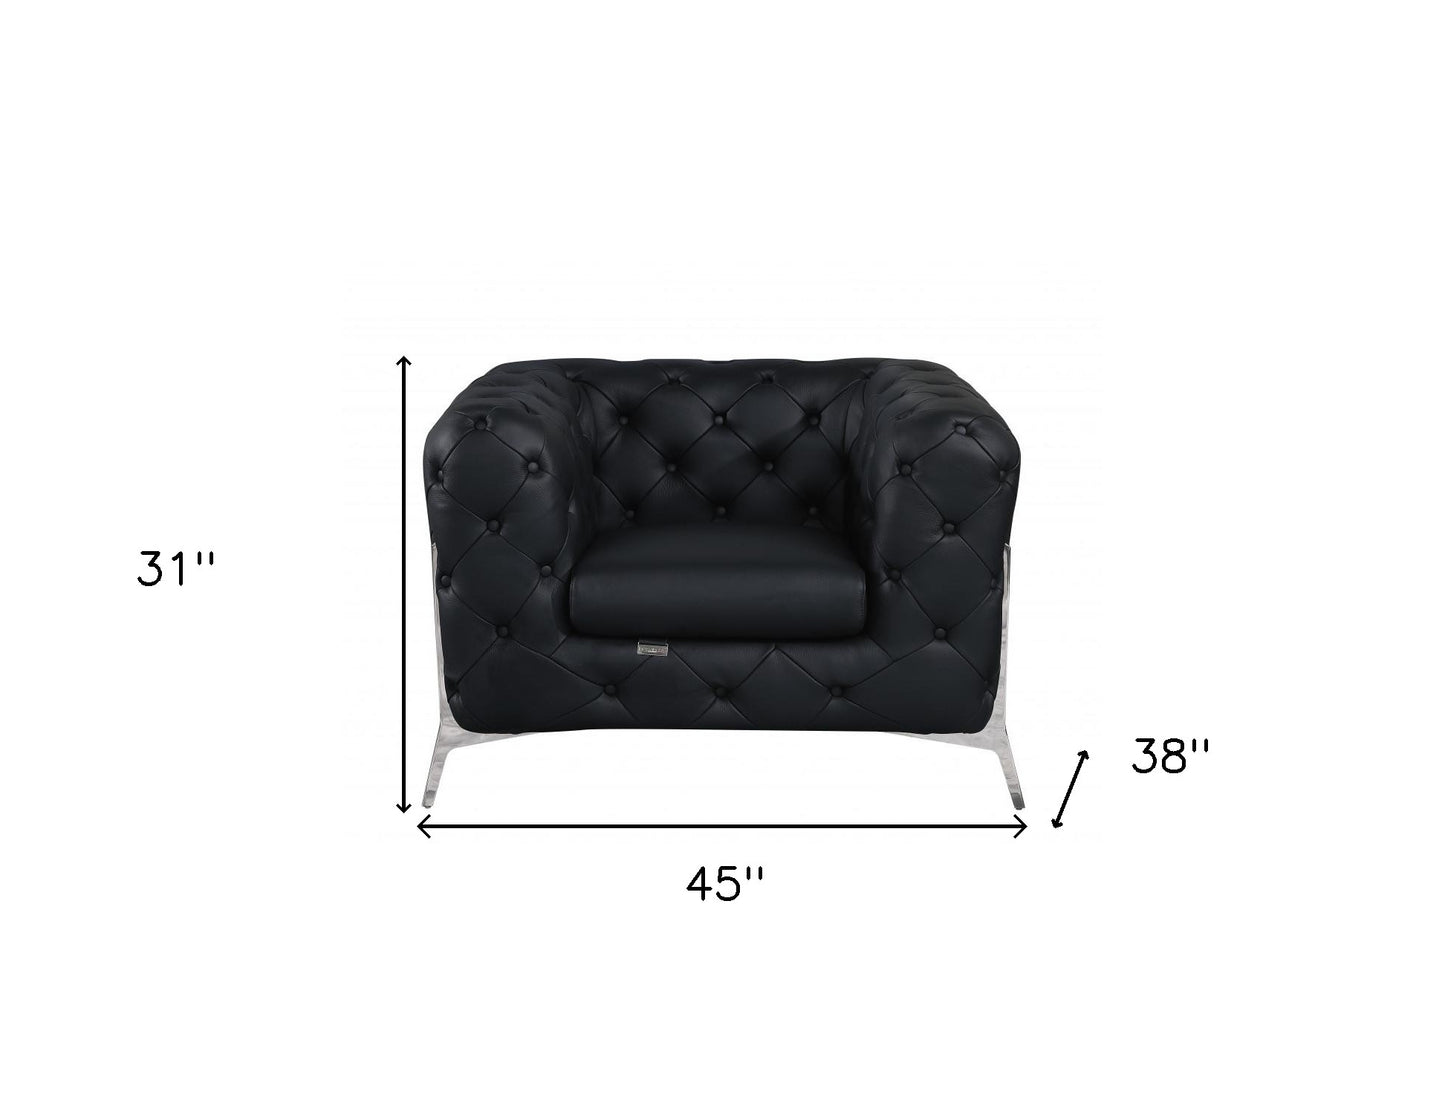 45" Black And Silver Italian Leather Tufted Chesterfield Chair